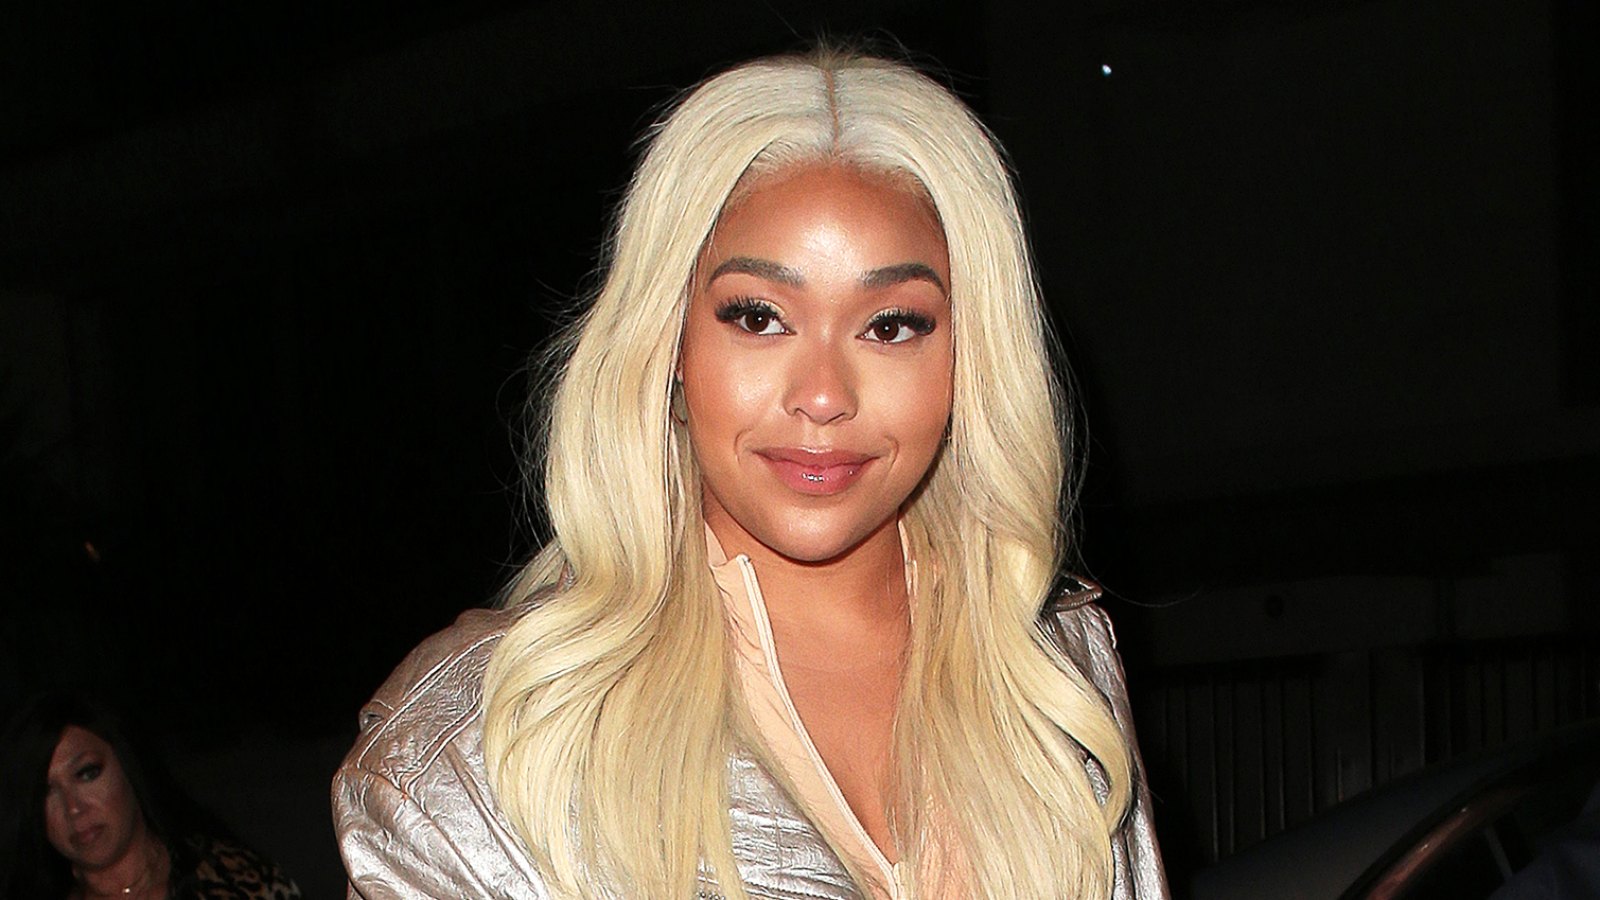 Jordyn Woods Posts About Being Blessed After Tristan Thompson Cheating Scandal